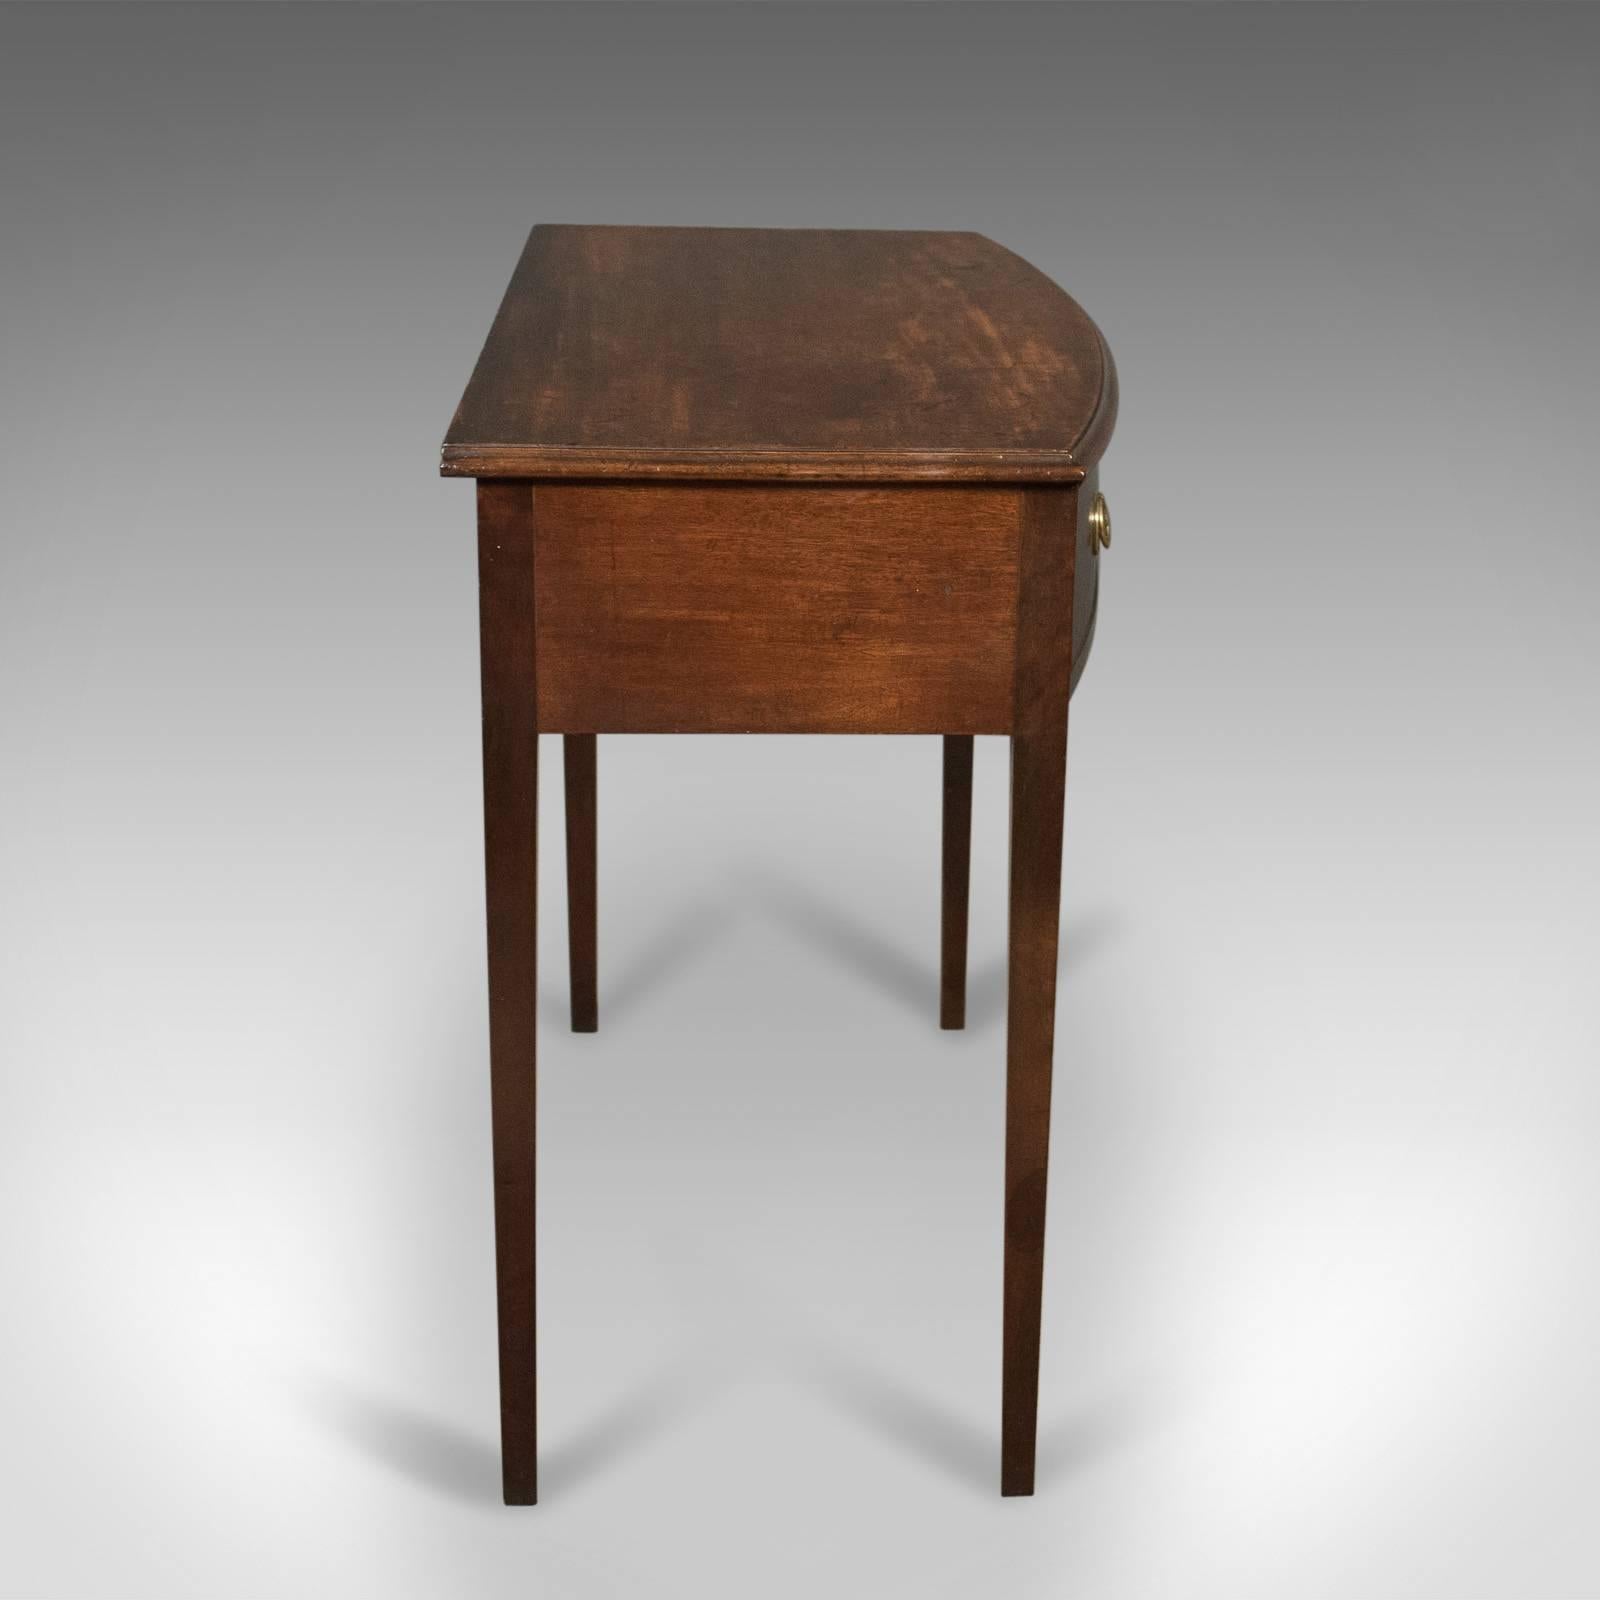 Georgian Antique Side Table, Mahogany, Bow Fronted, English, George III, circa 1770